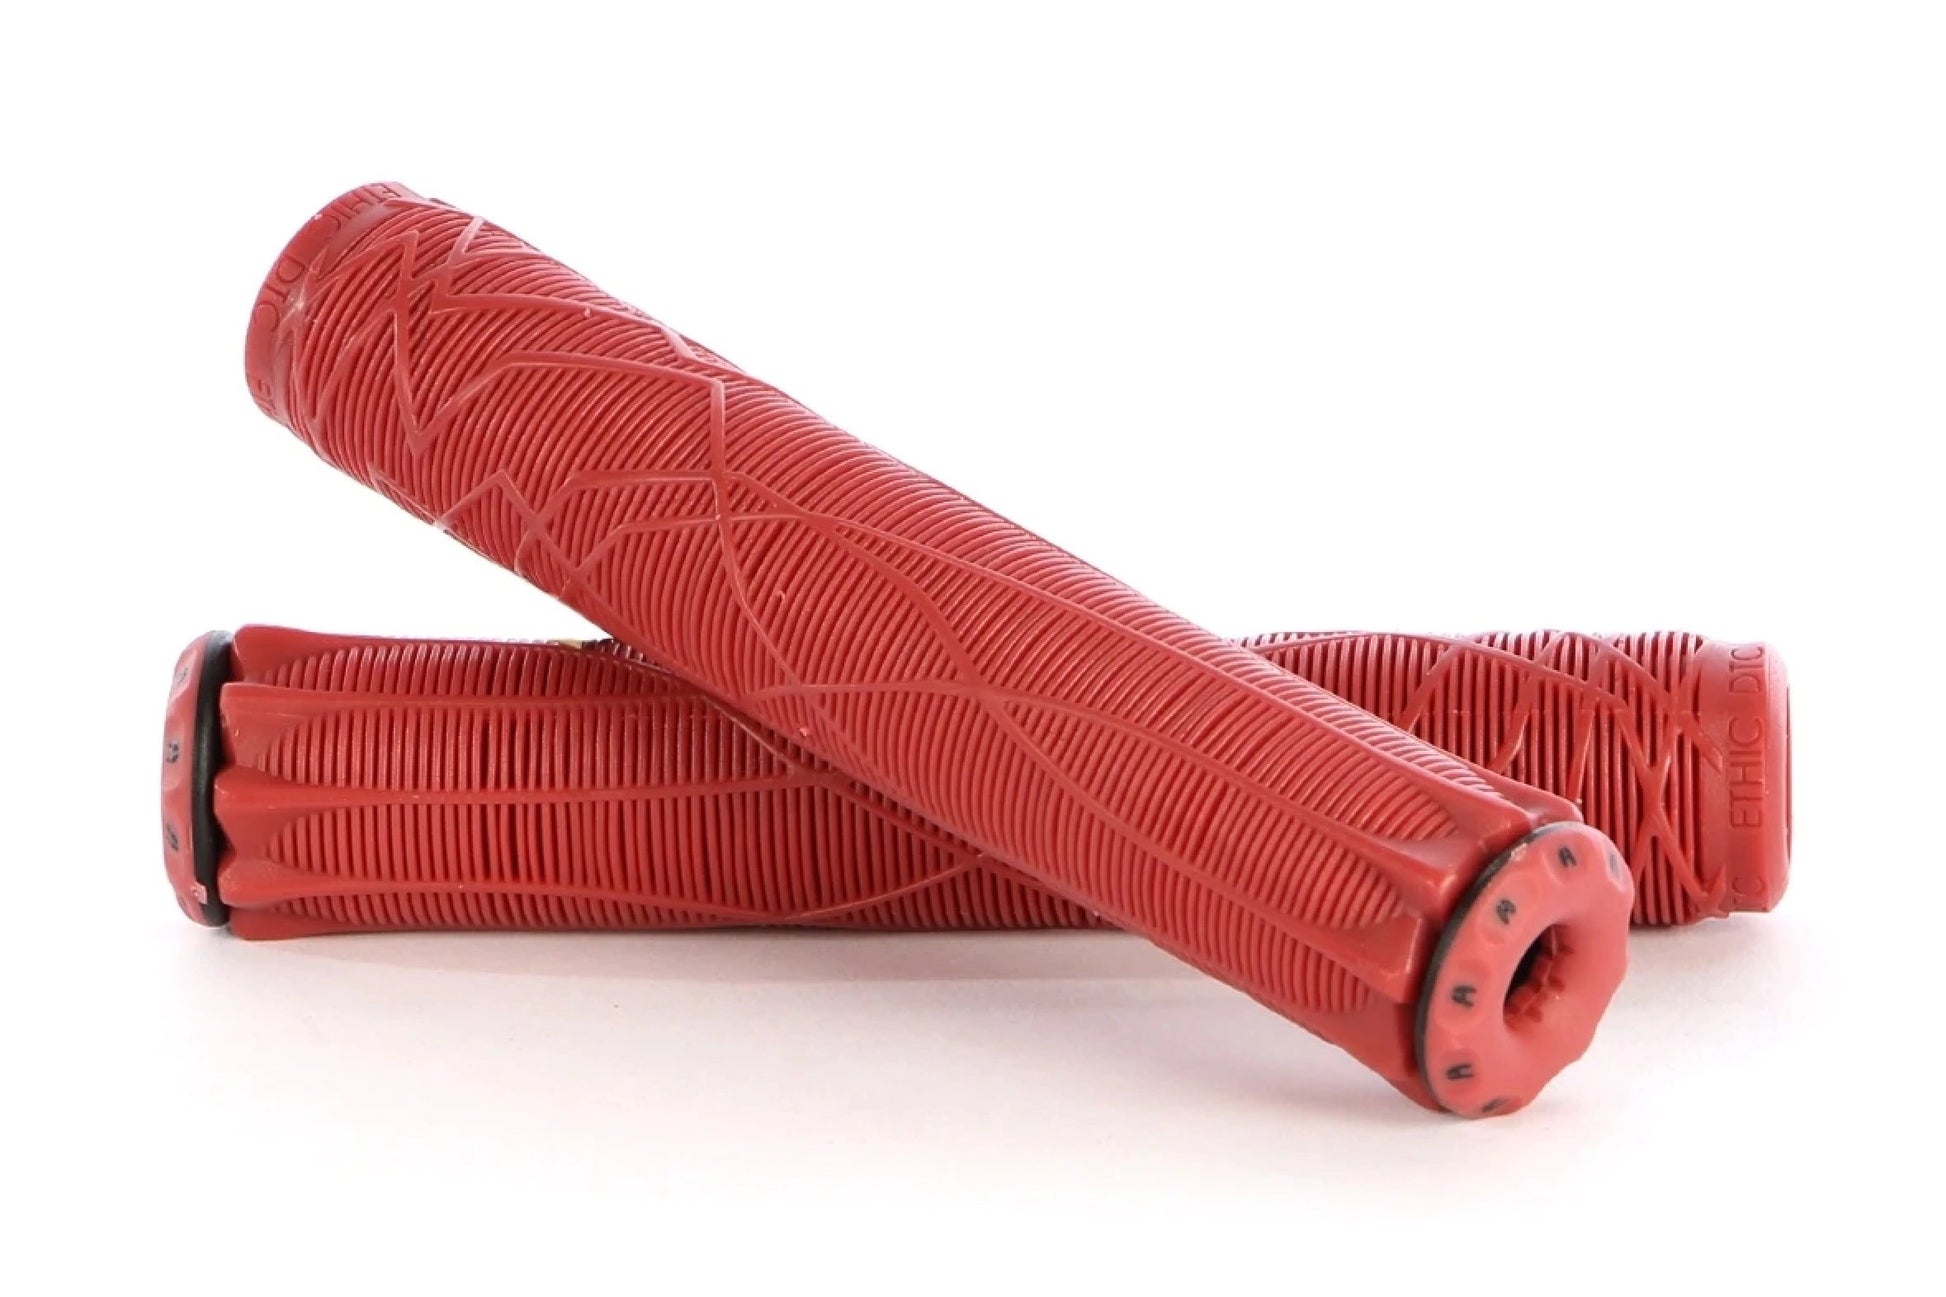 ethic-dtc-grips-rubber-red-trottinette-scooter